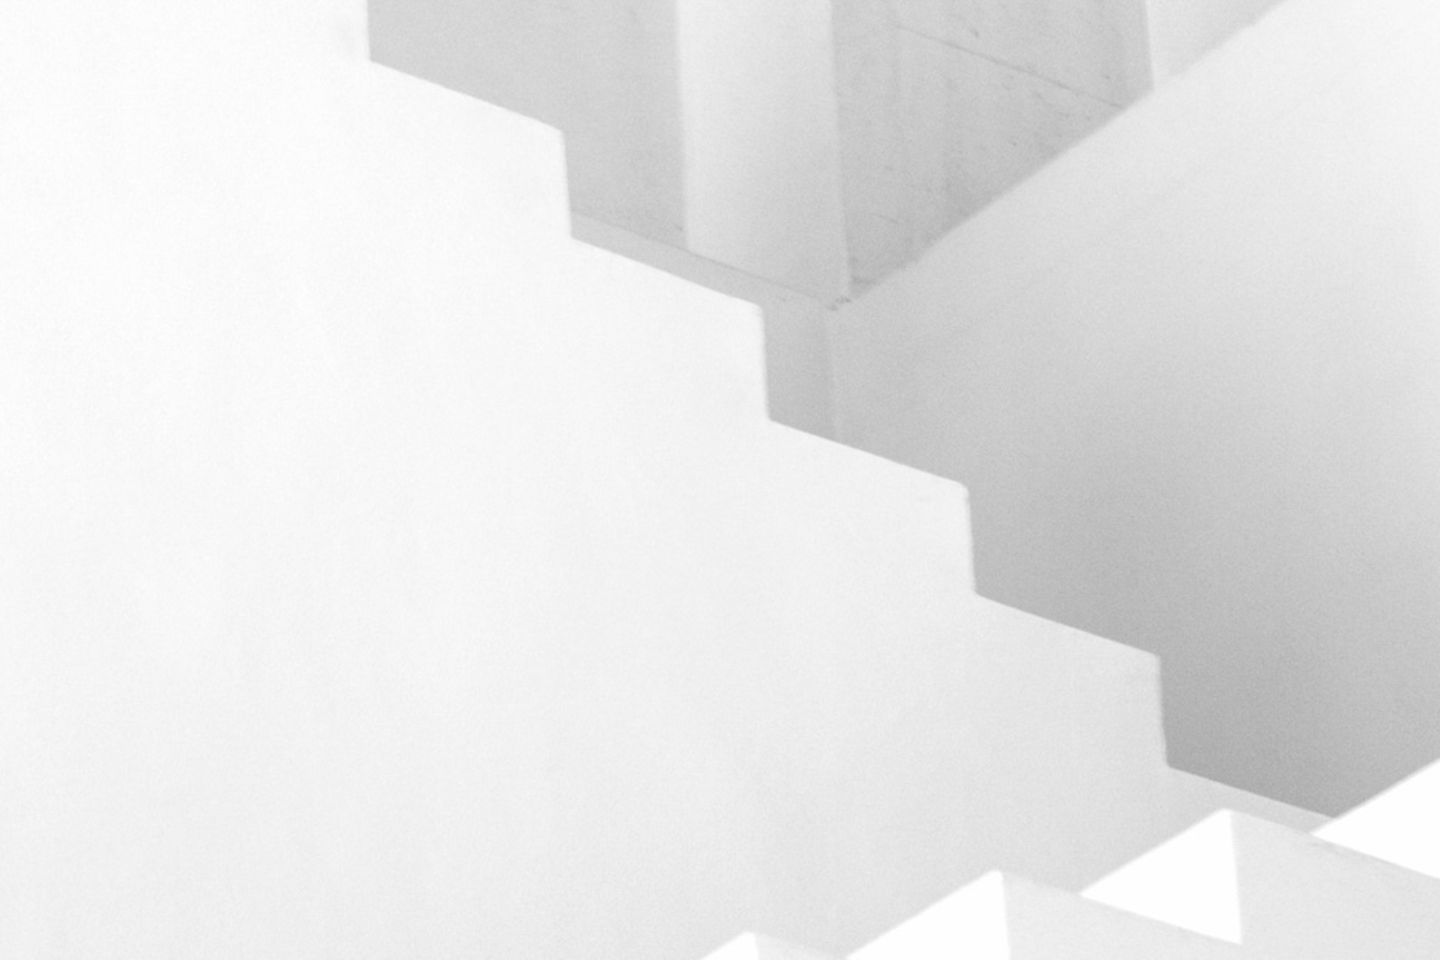 White-gray stairs against white background